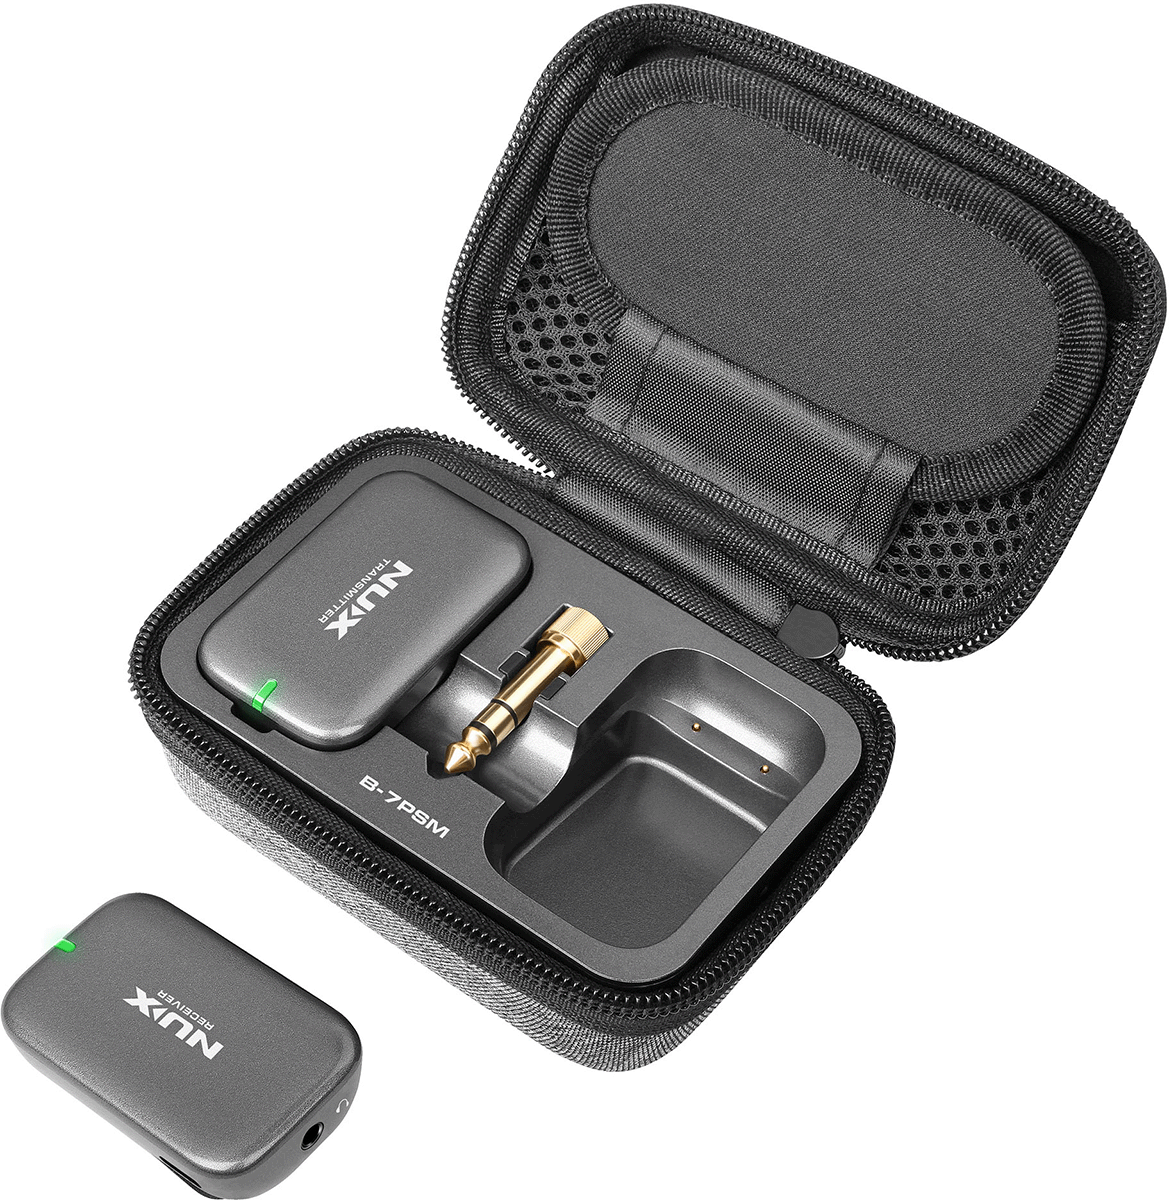 B7-PSM - wireless personal in-ear monitor system